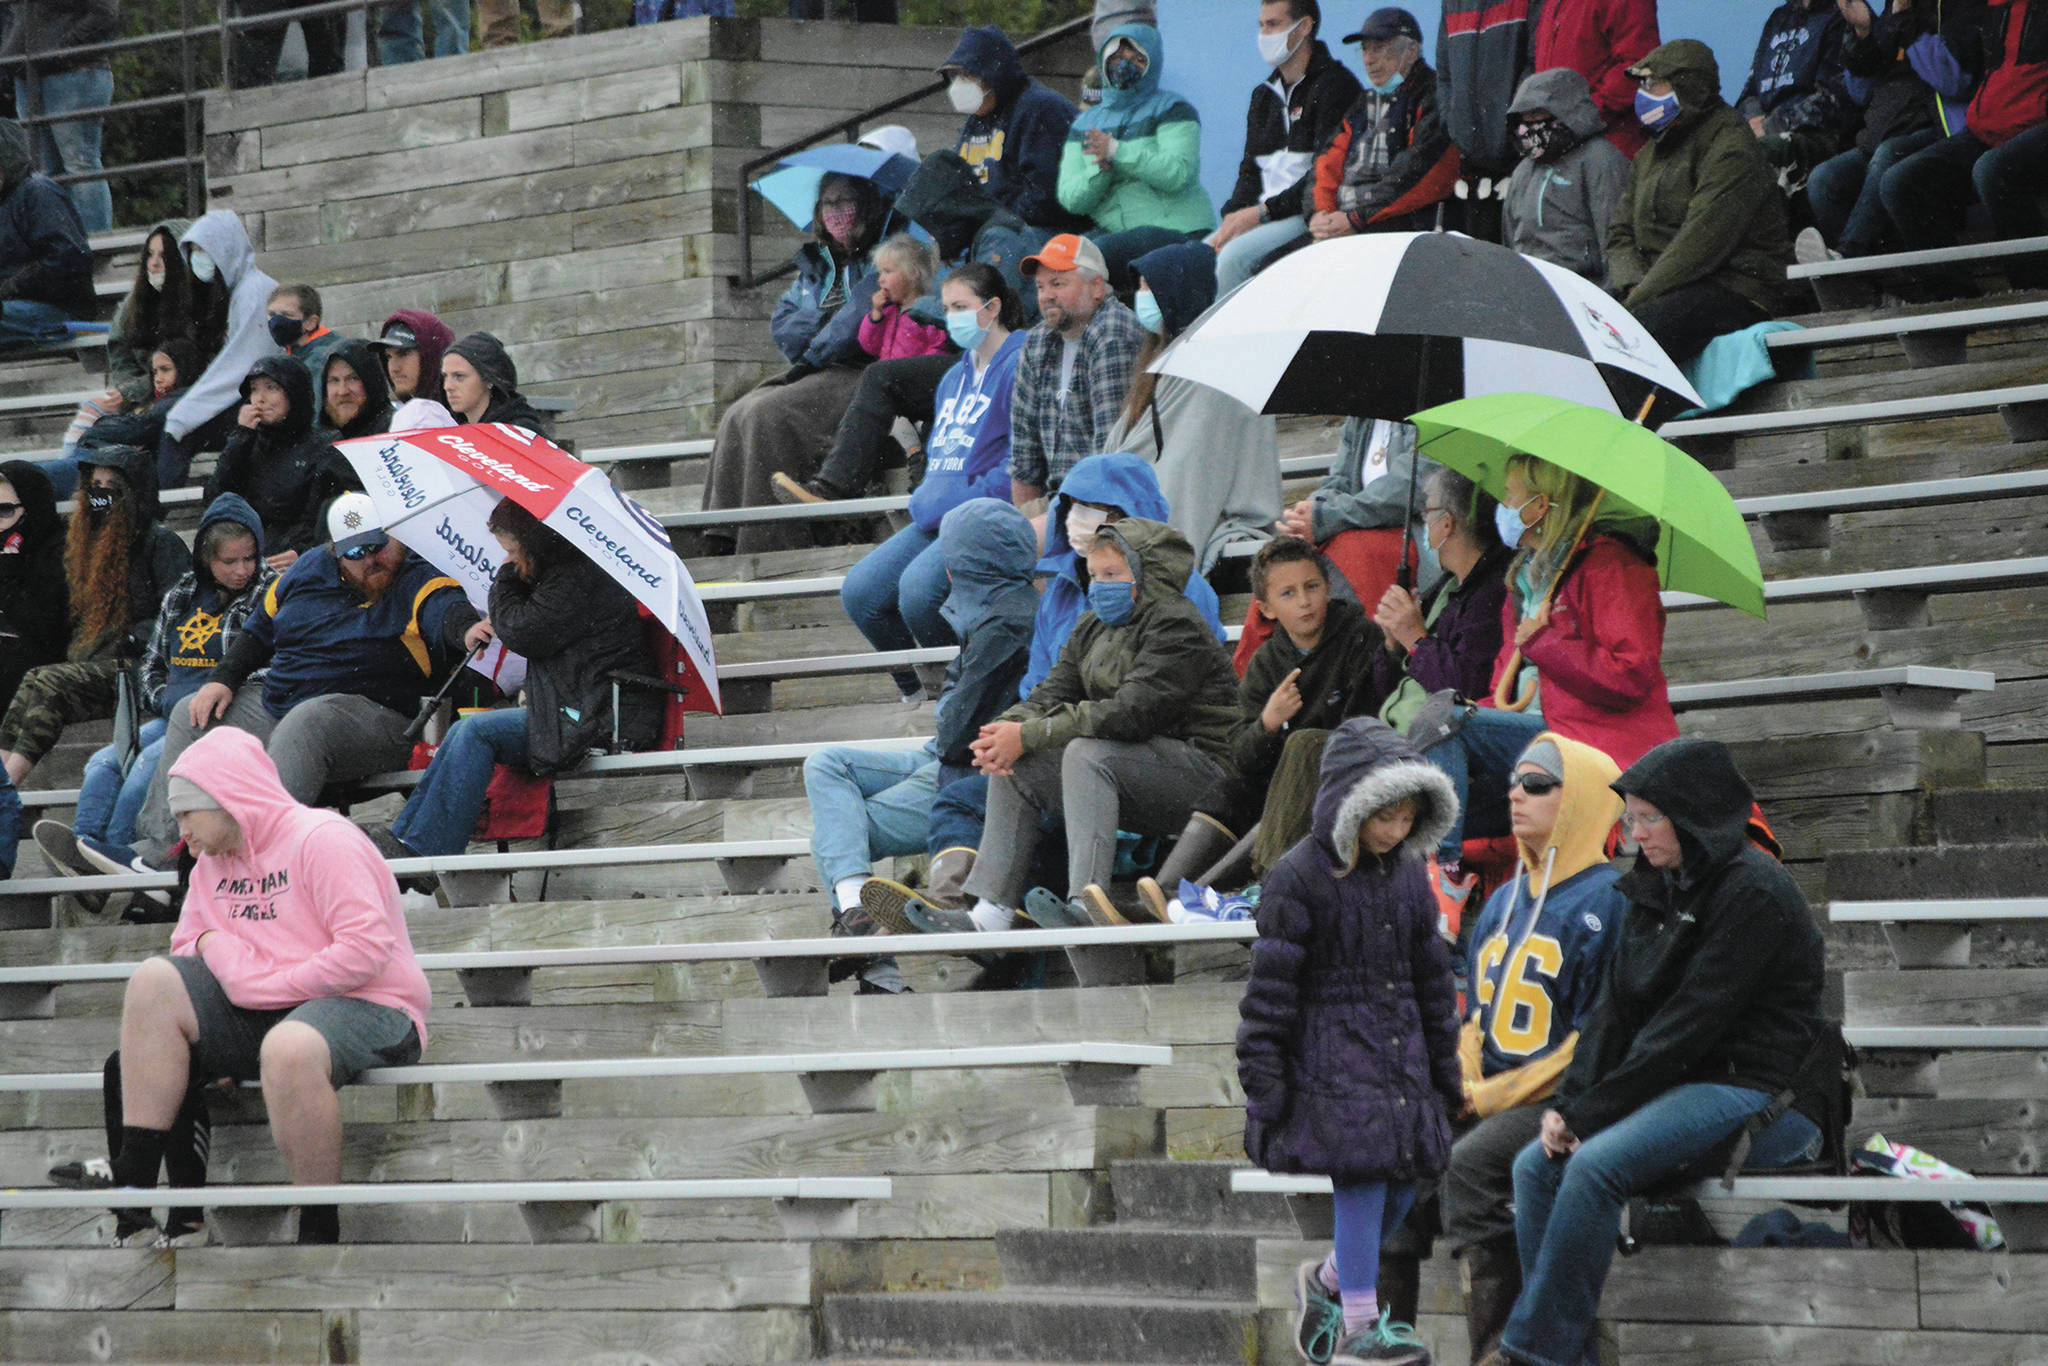 Mariner fans — some wearing masks and social distancing — endure a heavy rain at a Saturday, Aug. 29, 2020 football game against Seward High School in Homer, Alaska. (Photo by Michael Armstrong/Homer News)